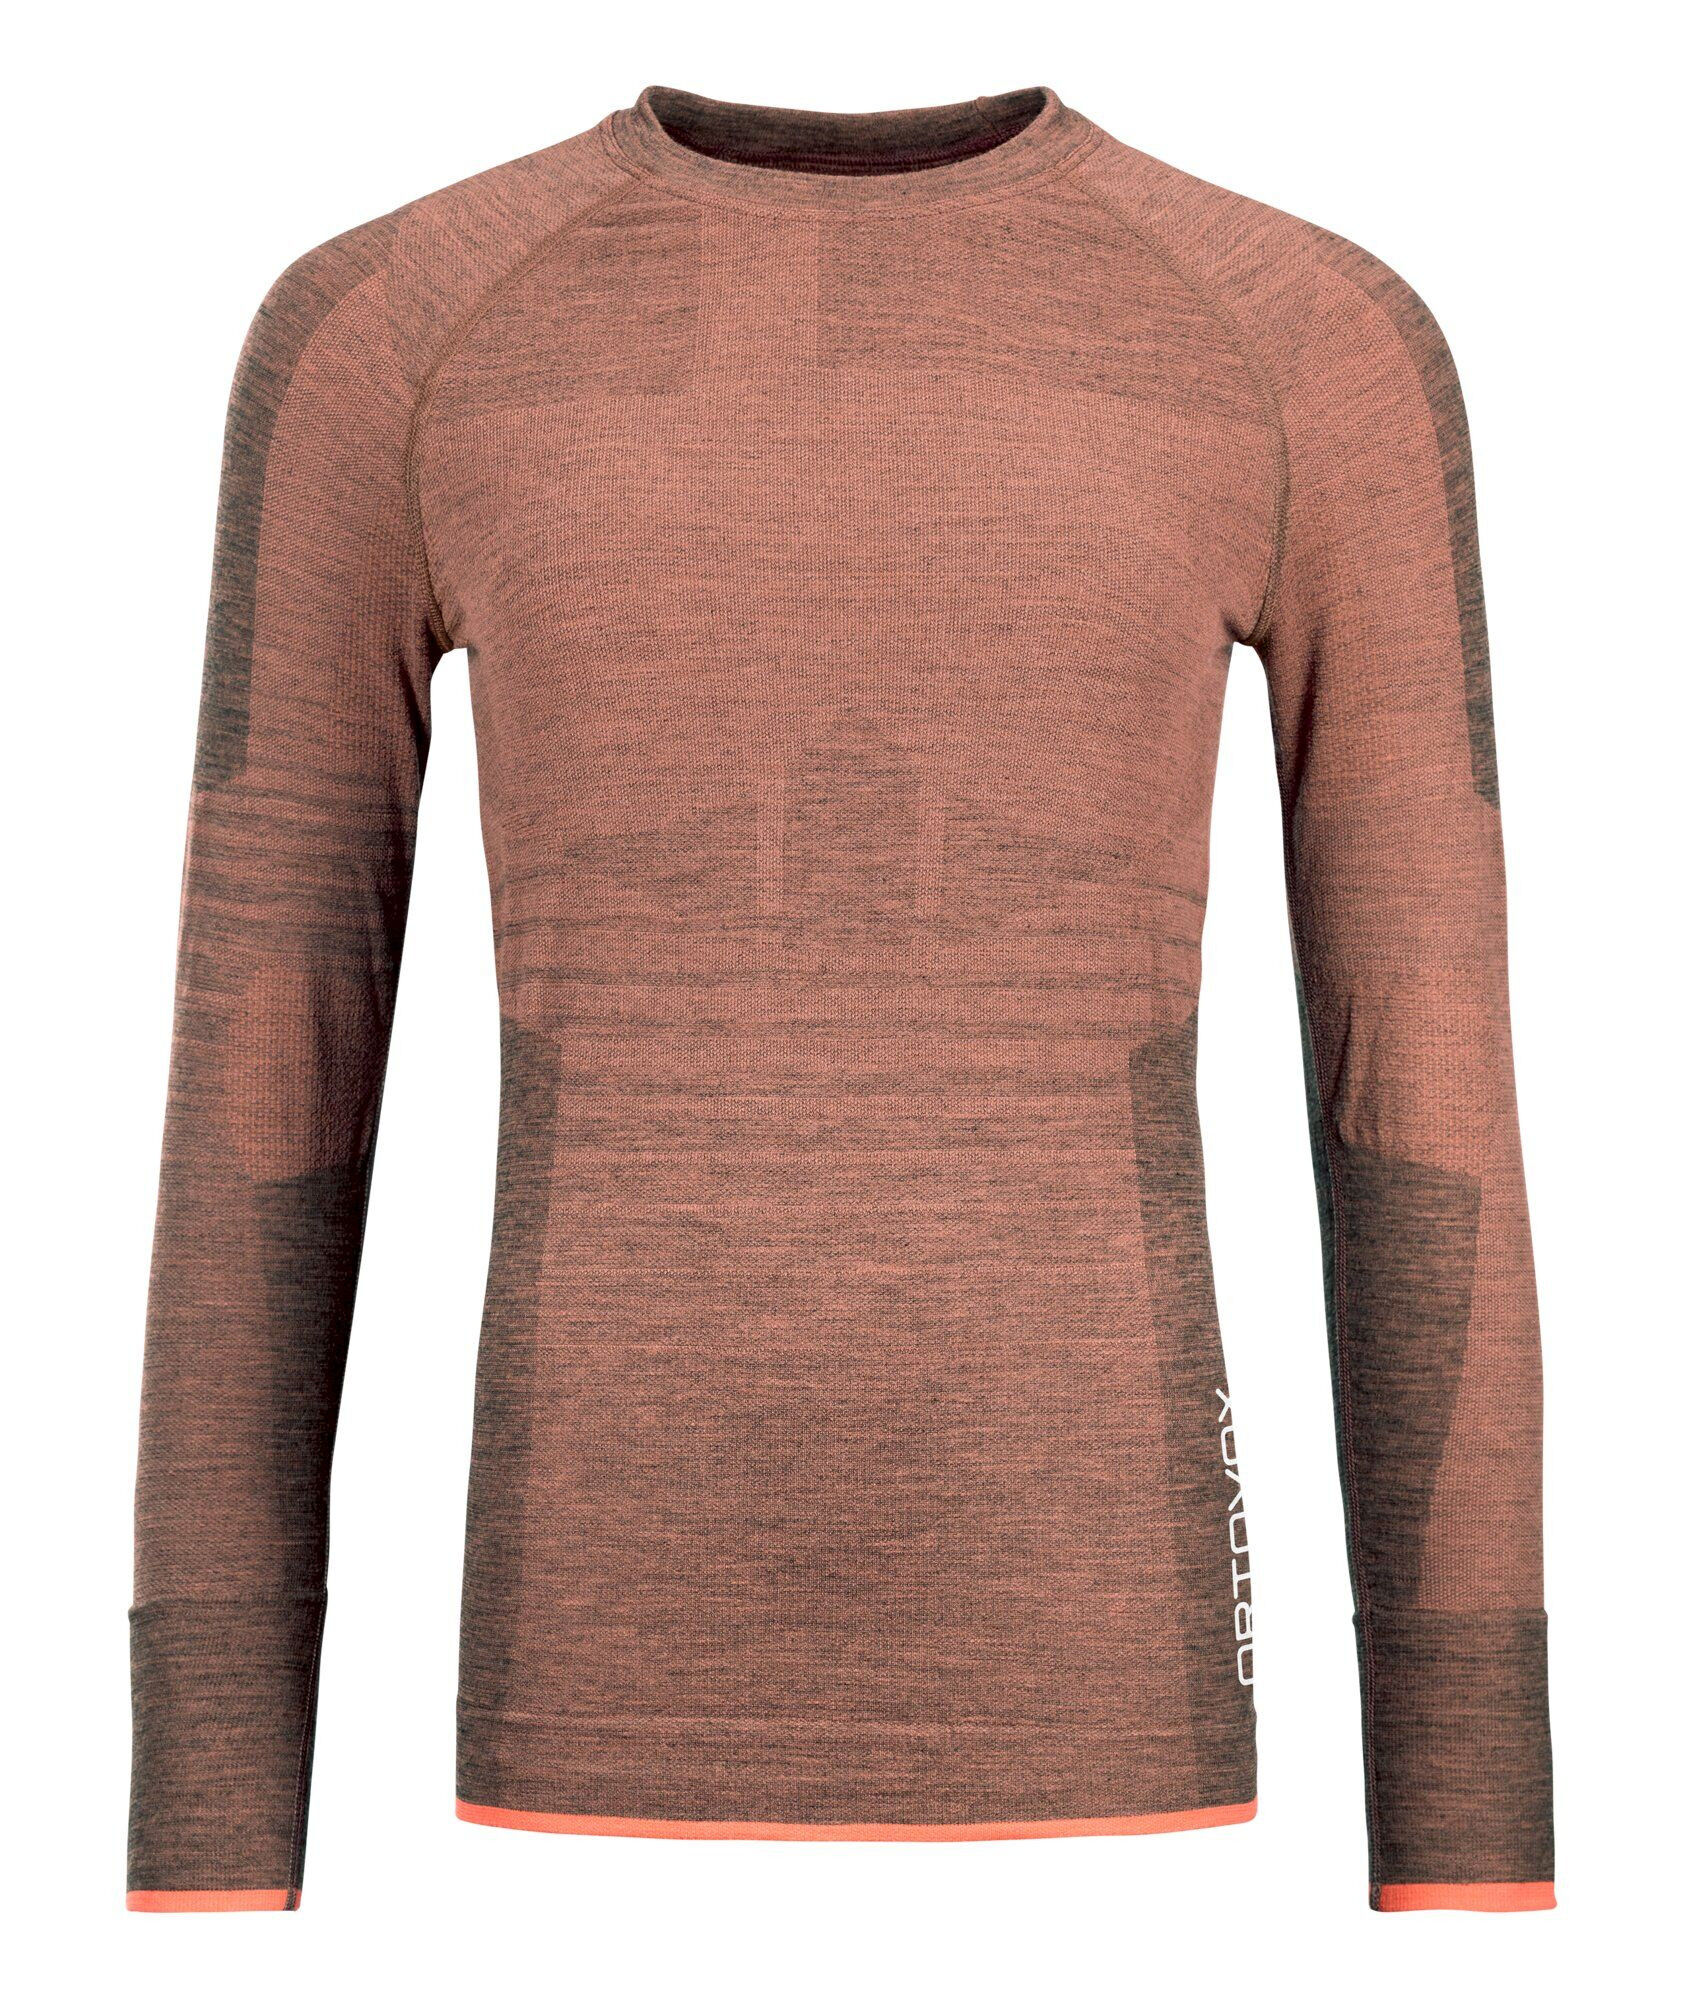 Ortovox 230 Competition Long Sleeve - Base layer - Women's